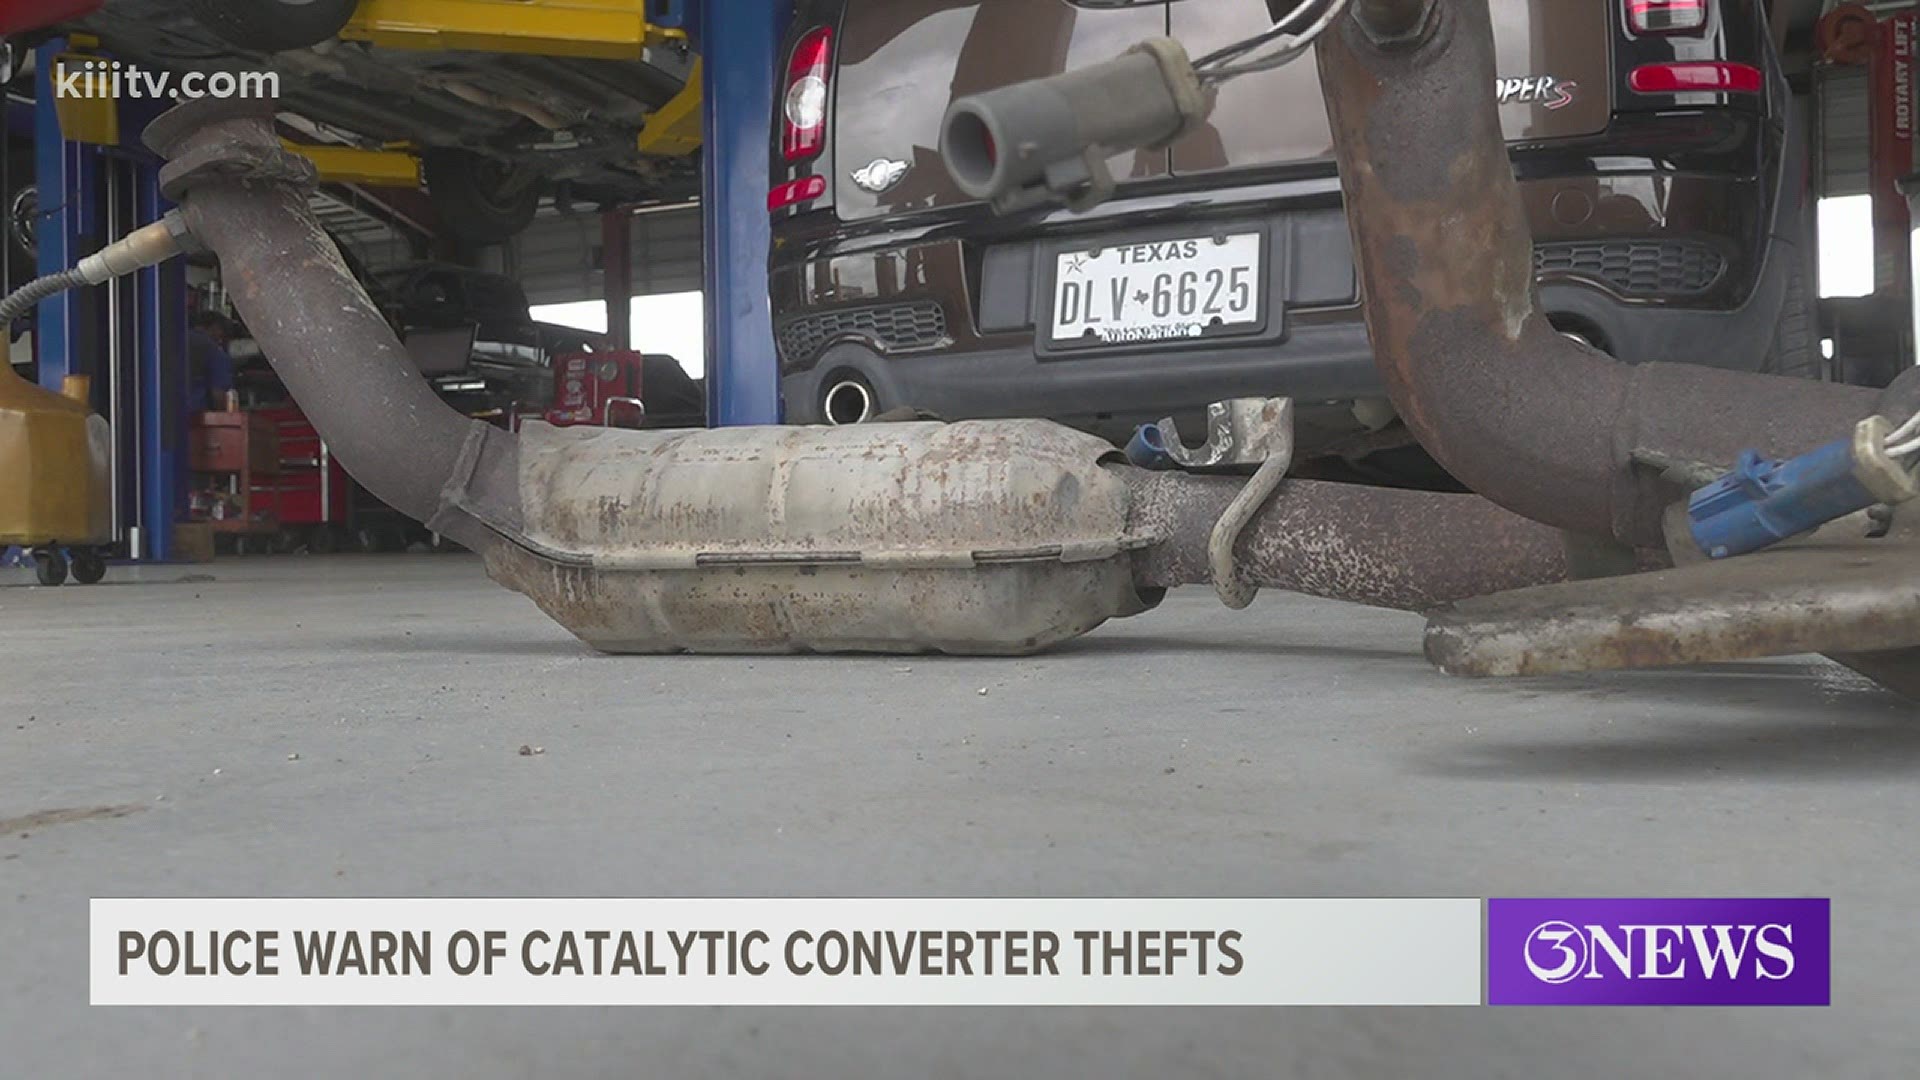 Robstown police said several vehicles were robbed of catalytic converters from vehicles at an apartment complex-over the weekend